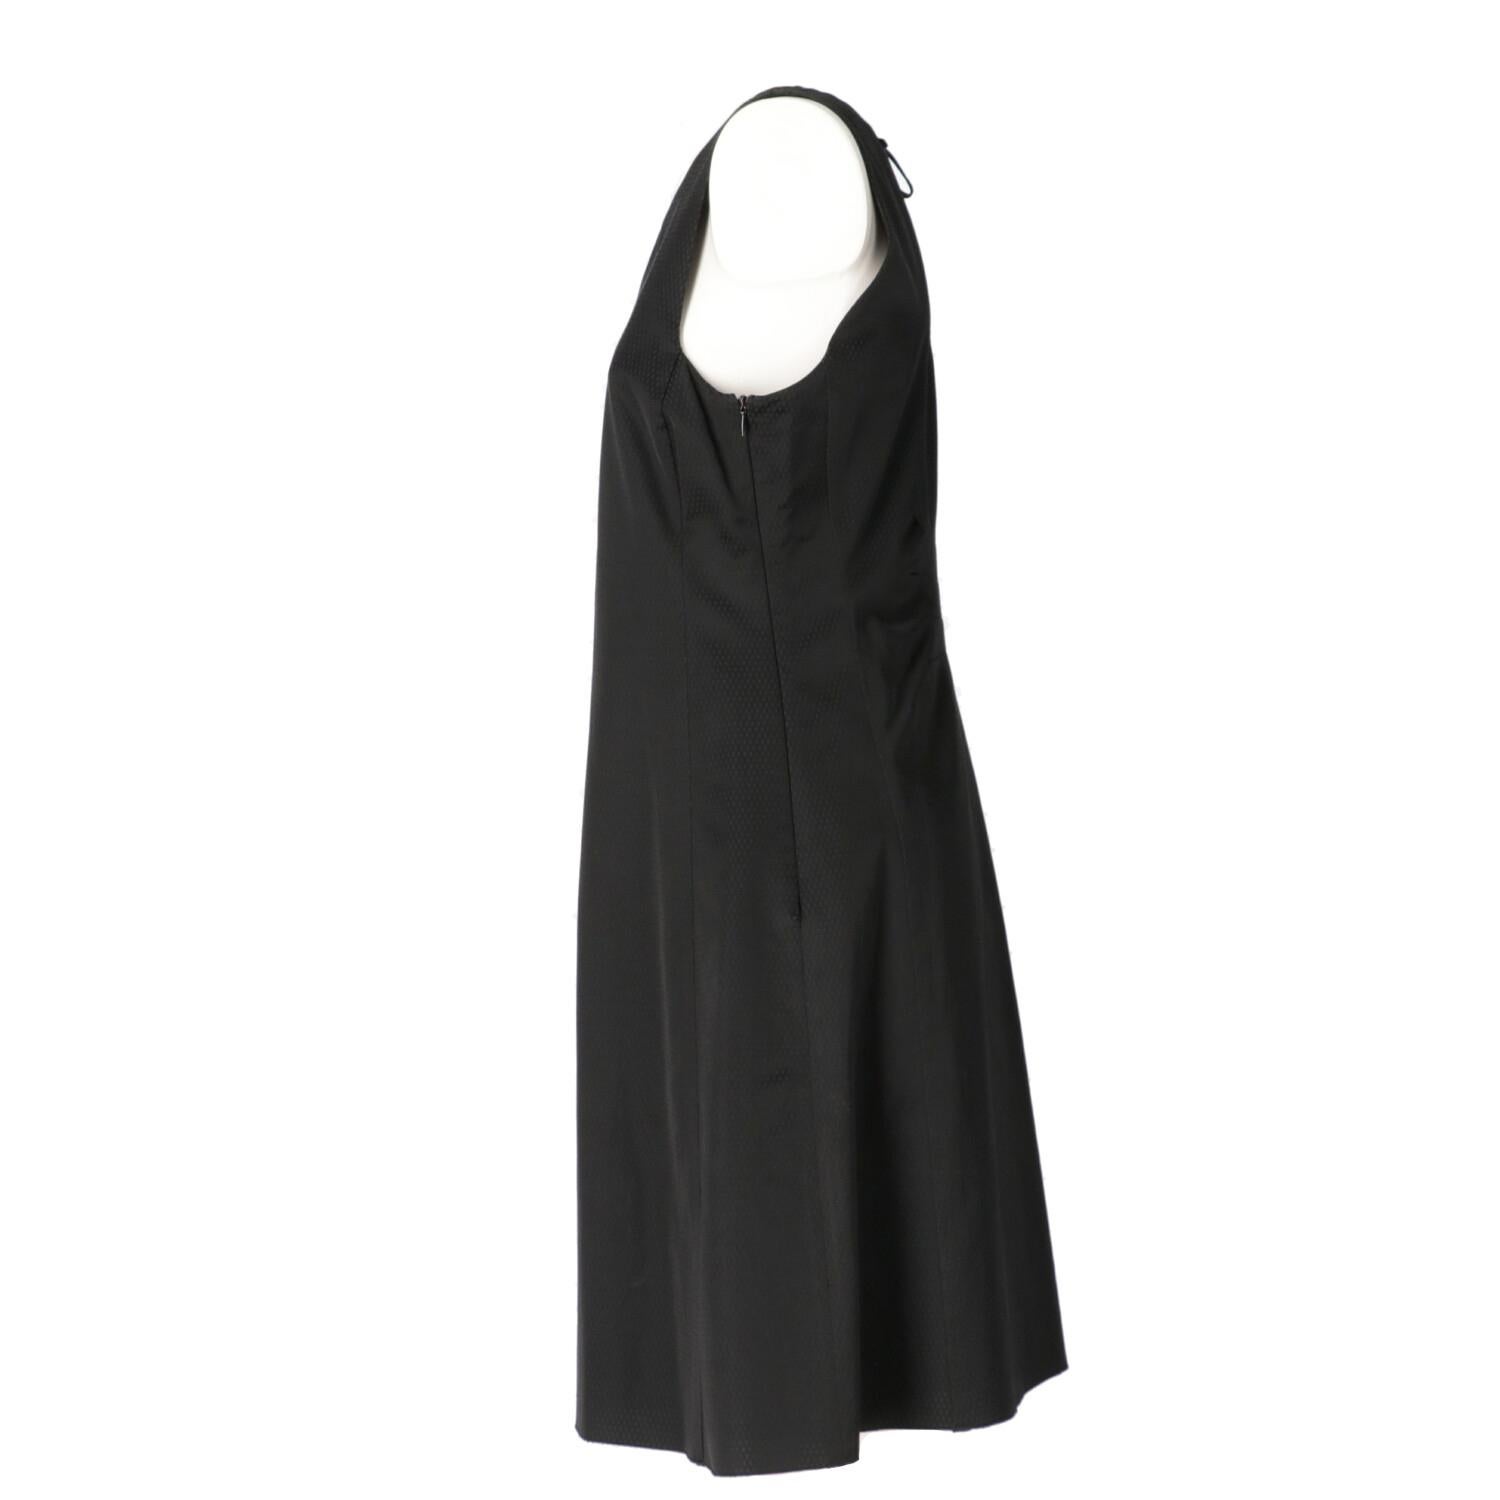 Emporio Armani black cotton blend dress with tone-on-tone jacquard pattern Model with round neckline with lace on the neck, sleeveless and back decorative horizontal pinces. Invisible side zip closure.

The product has a slight unstitching on the